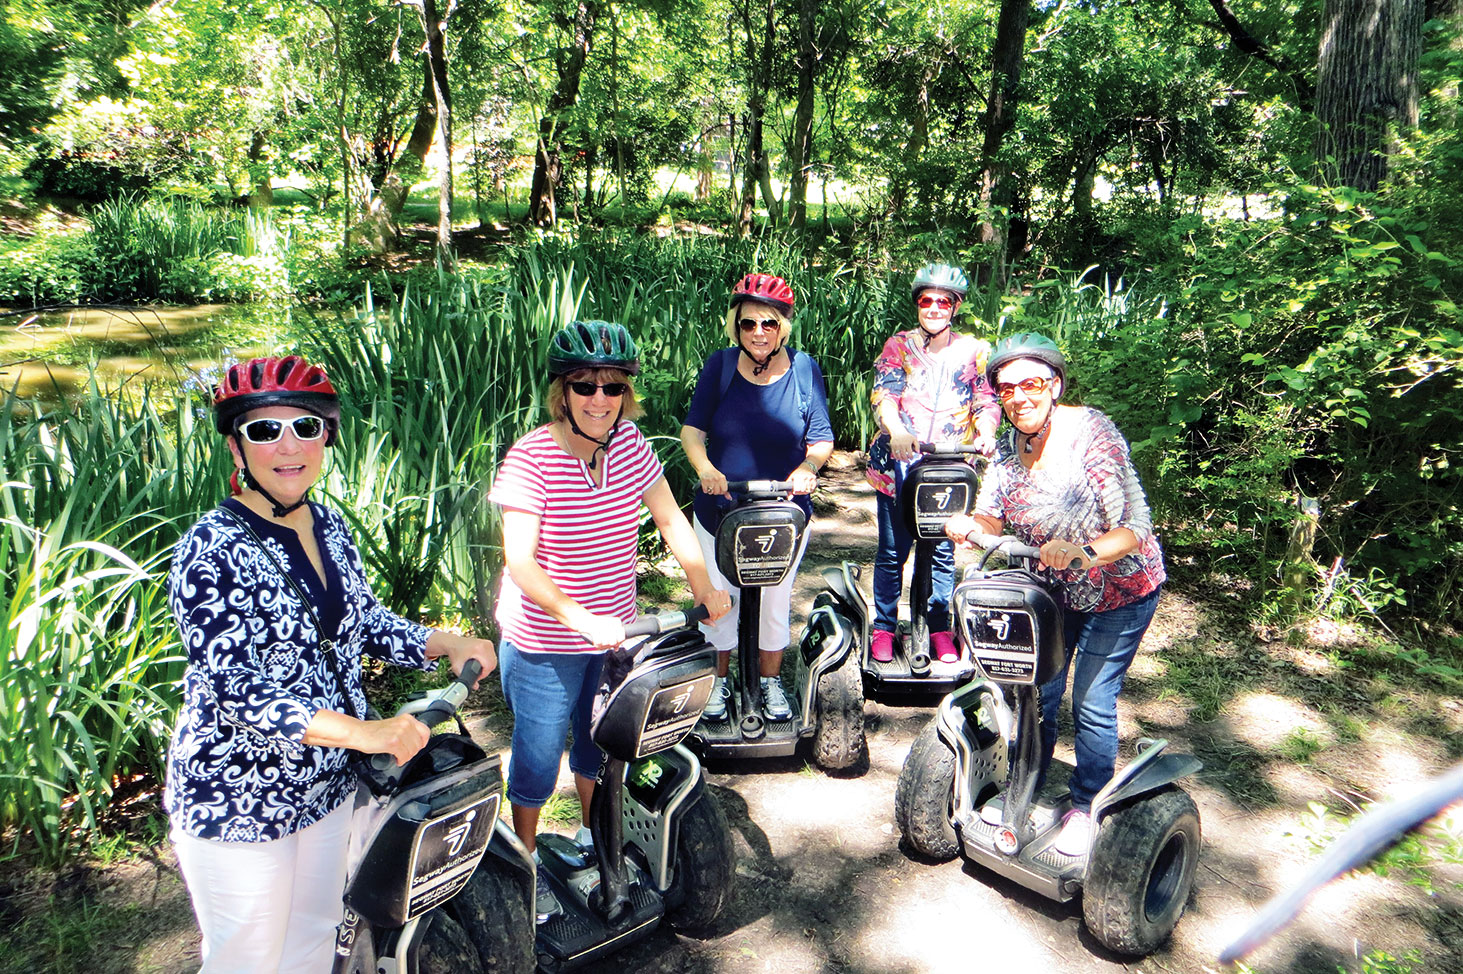 Girls on Wheels hop on Segways for a fun way to discover a new destination.